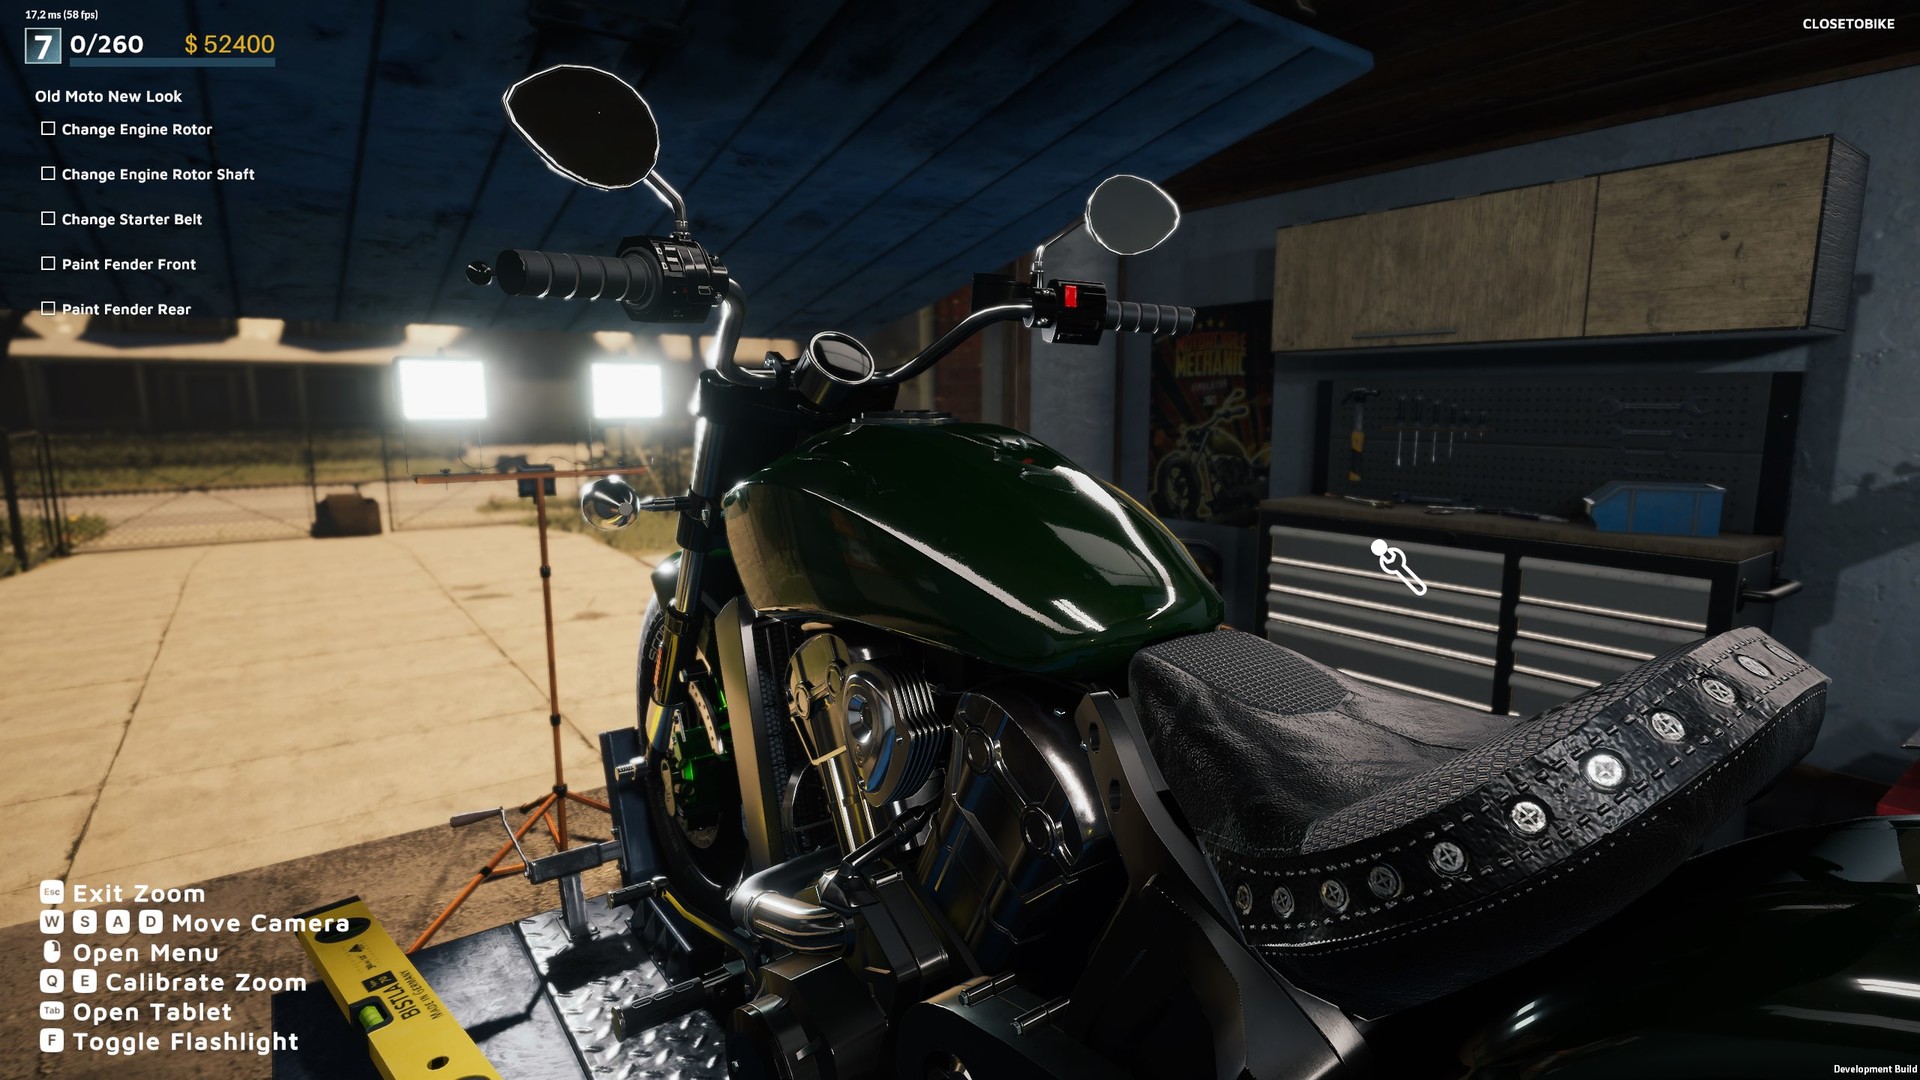 Find the best laptops for Motorcycle Mechanic Simulator 2021